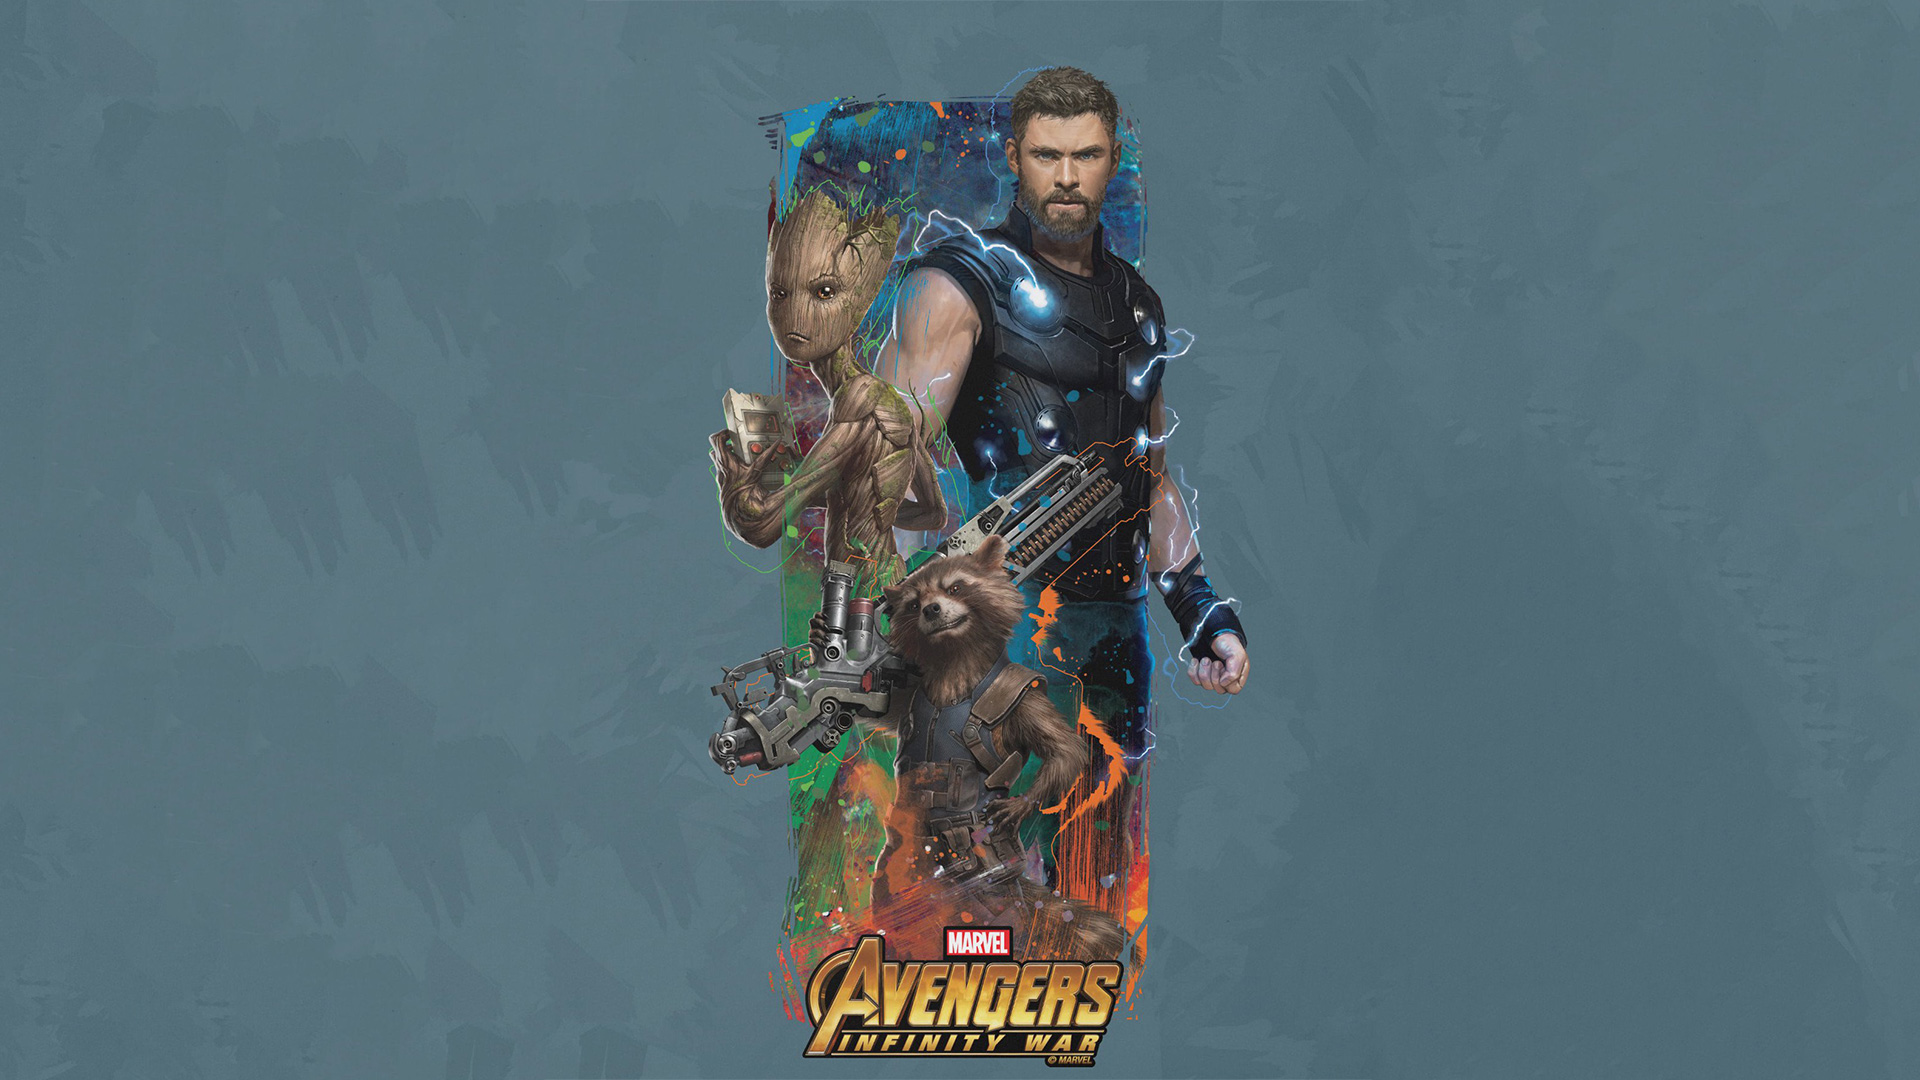 19x1080 Thor Rocket Groot Avengers Infinity War Artwork Laptop Full Hd 1080p Hd 4k Wallpapers Images Backgrounds Photos And Pictures